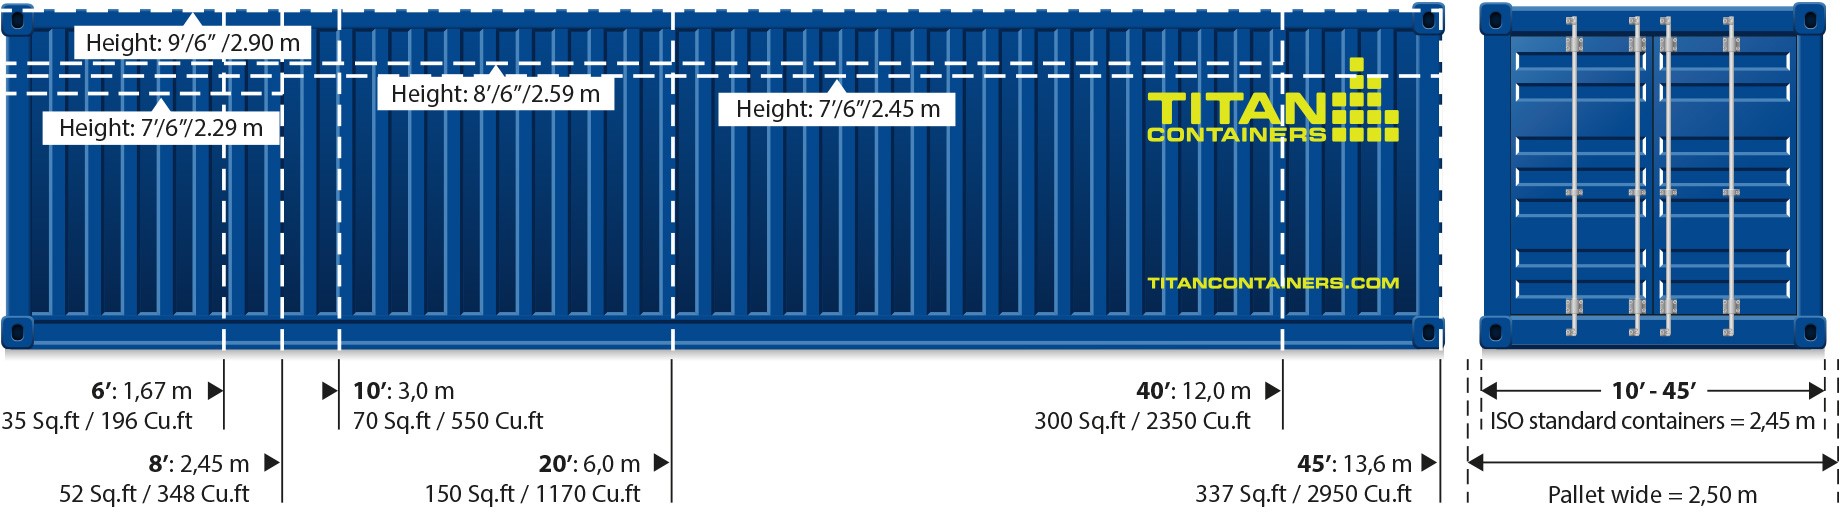 ISO/CSC Shipping and storage containers
Length: Almost all containers are 20' or 40' (6m/12m) with very few 10' (3m), 30' (9m) and 45' (13.6m)
Width: 8' (2.45m) is standard though in Europe there are a few that are pallet width = 2.50m
Height: Standard 8'6" (2.59m) and High Cube 9'6" (2.90m) are normal
Storage containers (normally without CSC)
There are smaller sizes than 10' (3m) and these typically have lower heights and widths than ISO standard dimensions
There are also non-ISO lengths between 10' and 40' featuring ISO standard heights/widths
USA domestic containers
Dimensions of these are suited to US intermmodal regulations. These containers are too long for use in EU